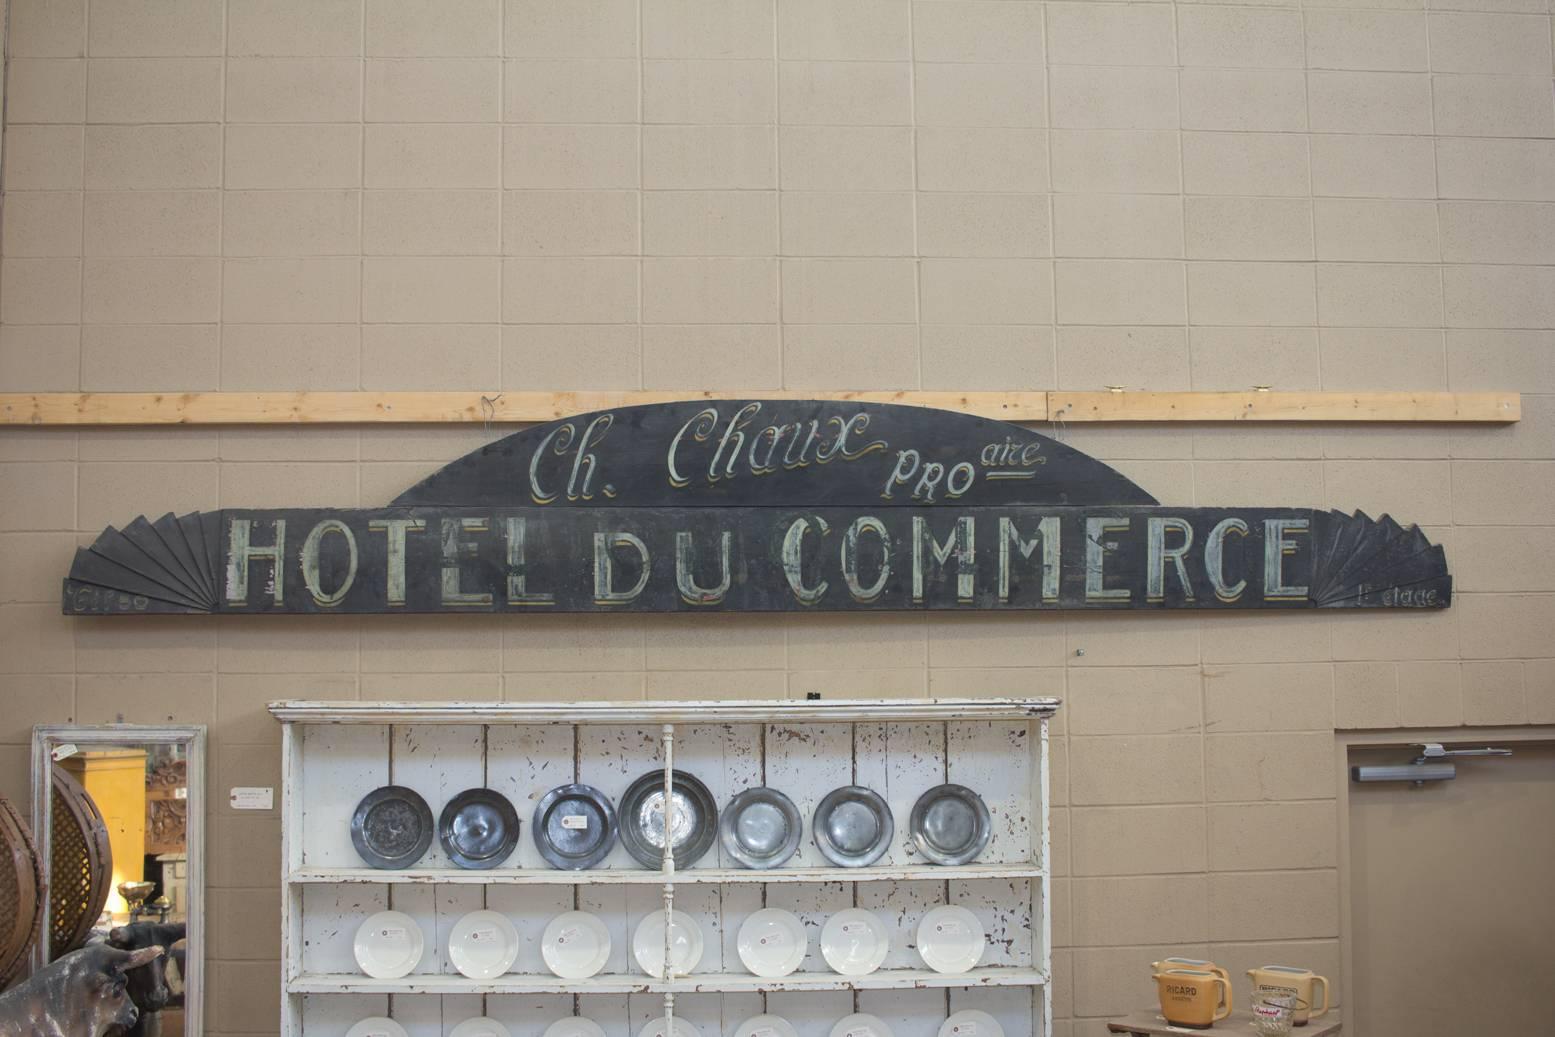 This substantial hand-painted French Art Deco sign is from the Hotel Du Commerce. The hotel would have been in the business district (Pro aire) and the proprietor Ch. Chaux!

  